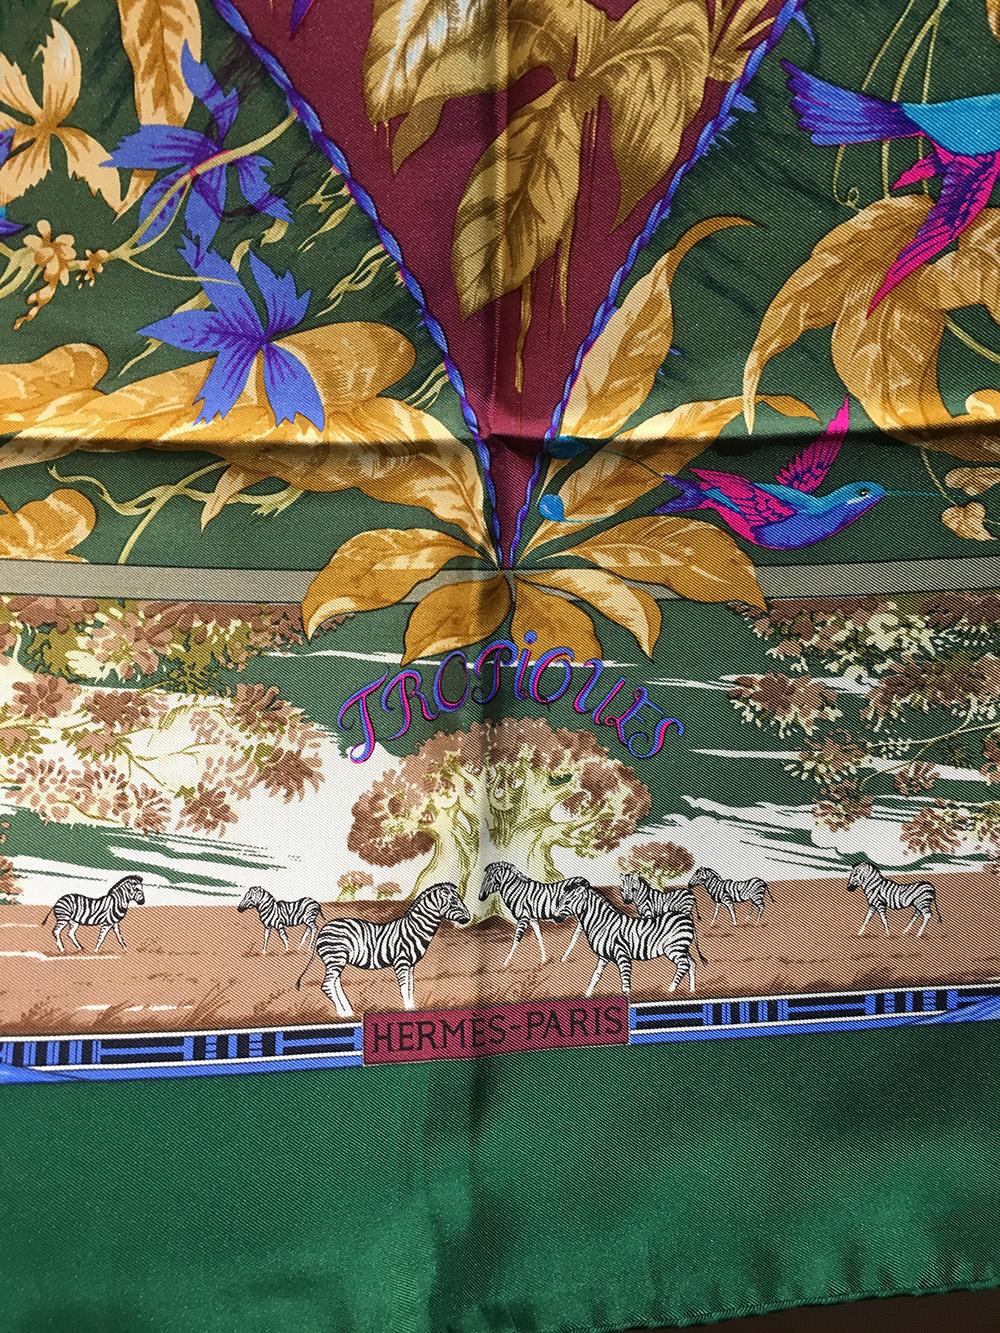 Vintage Hermes Tropiques Silk Scarf in Pink c1980s in good condition. Original silk screen design c1987 by Laurence Bourthoumieux features various tropical flora and fauna over a forest green background. Zebras and giraffes in palm desert scenes